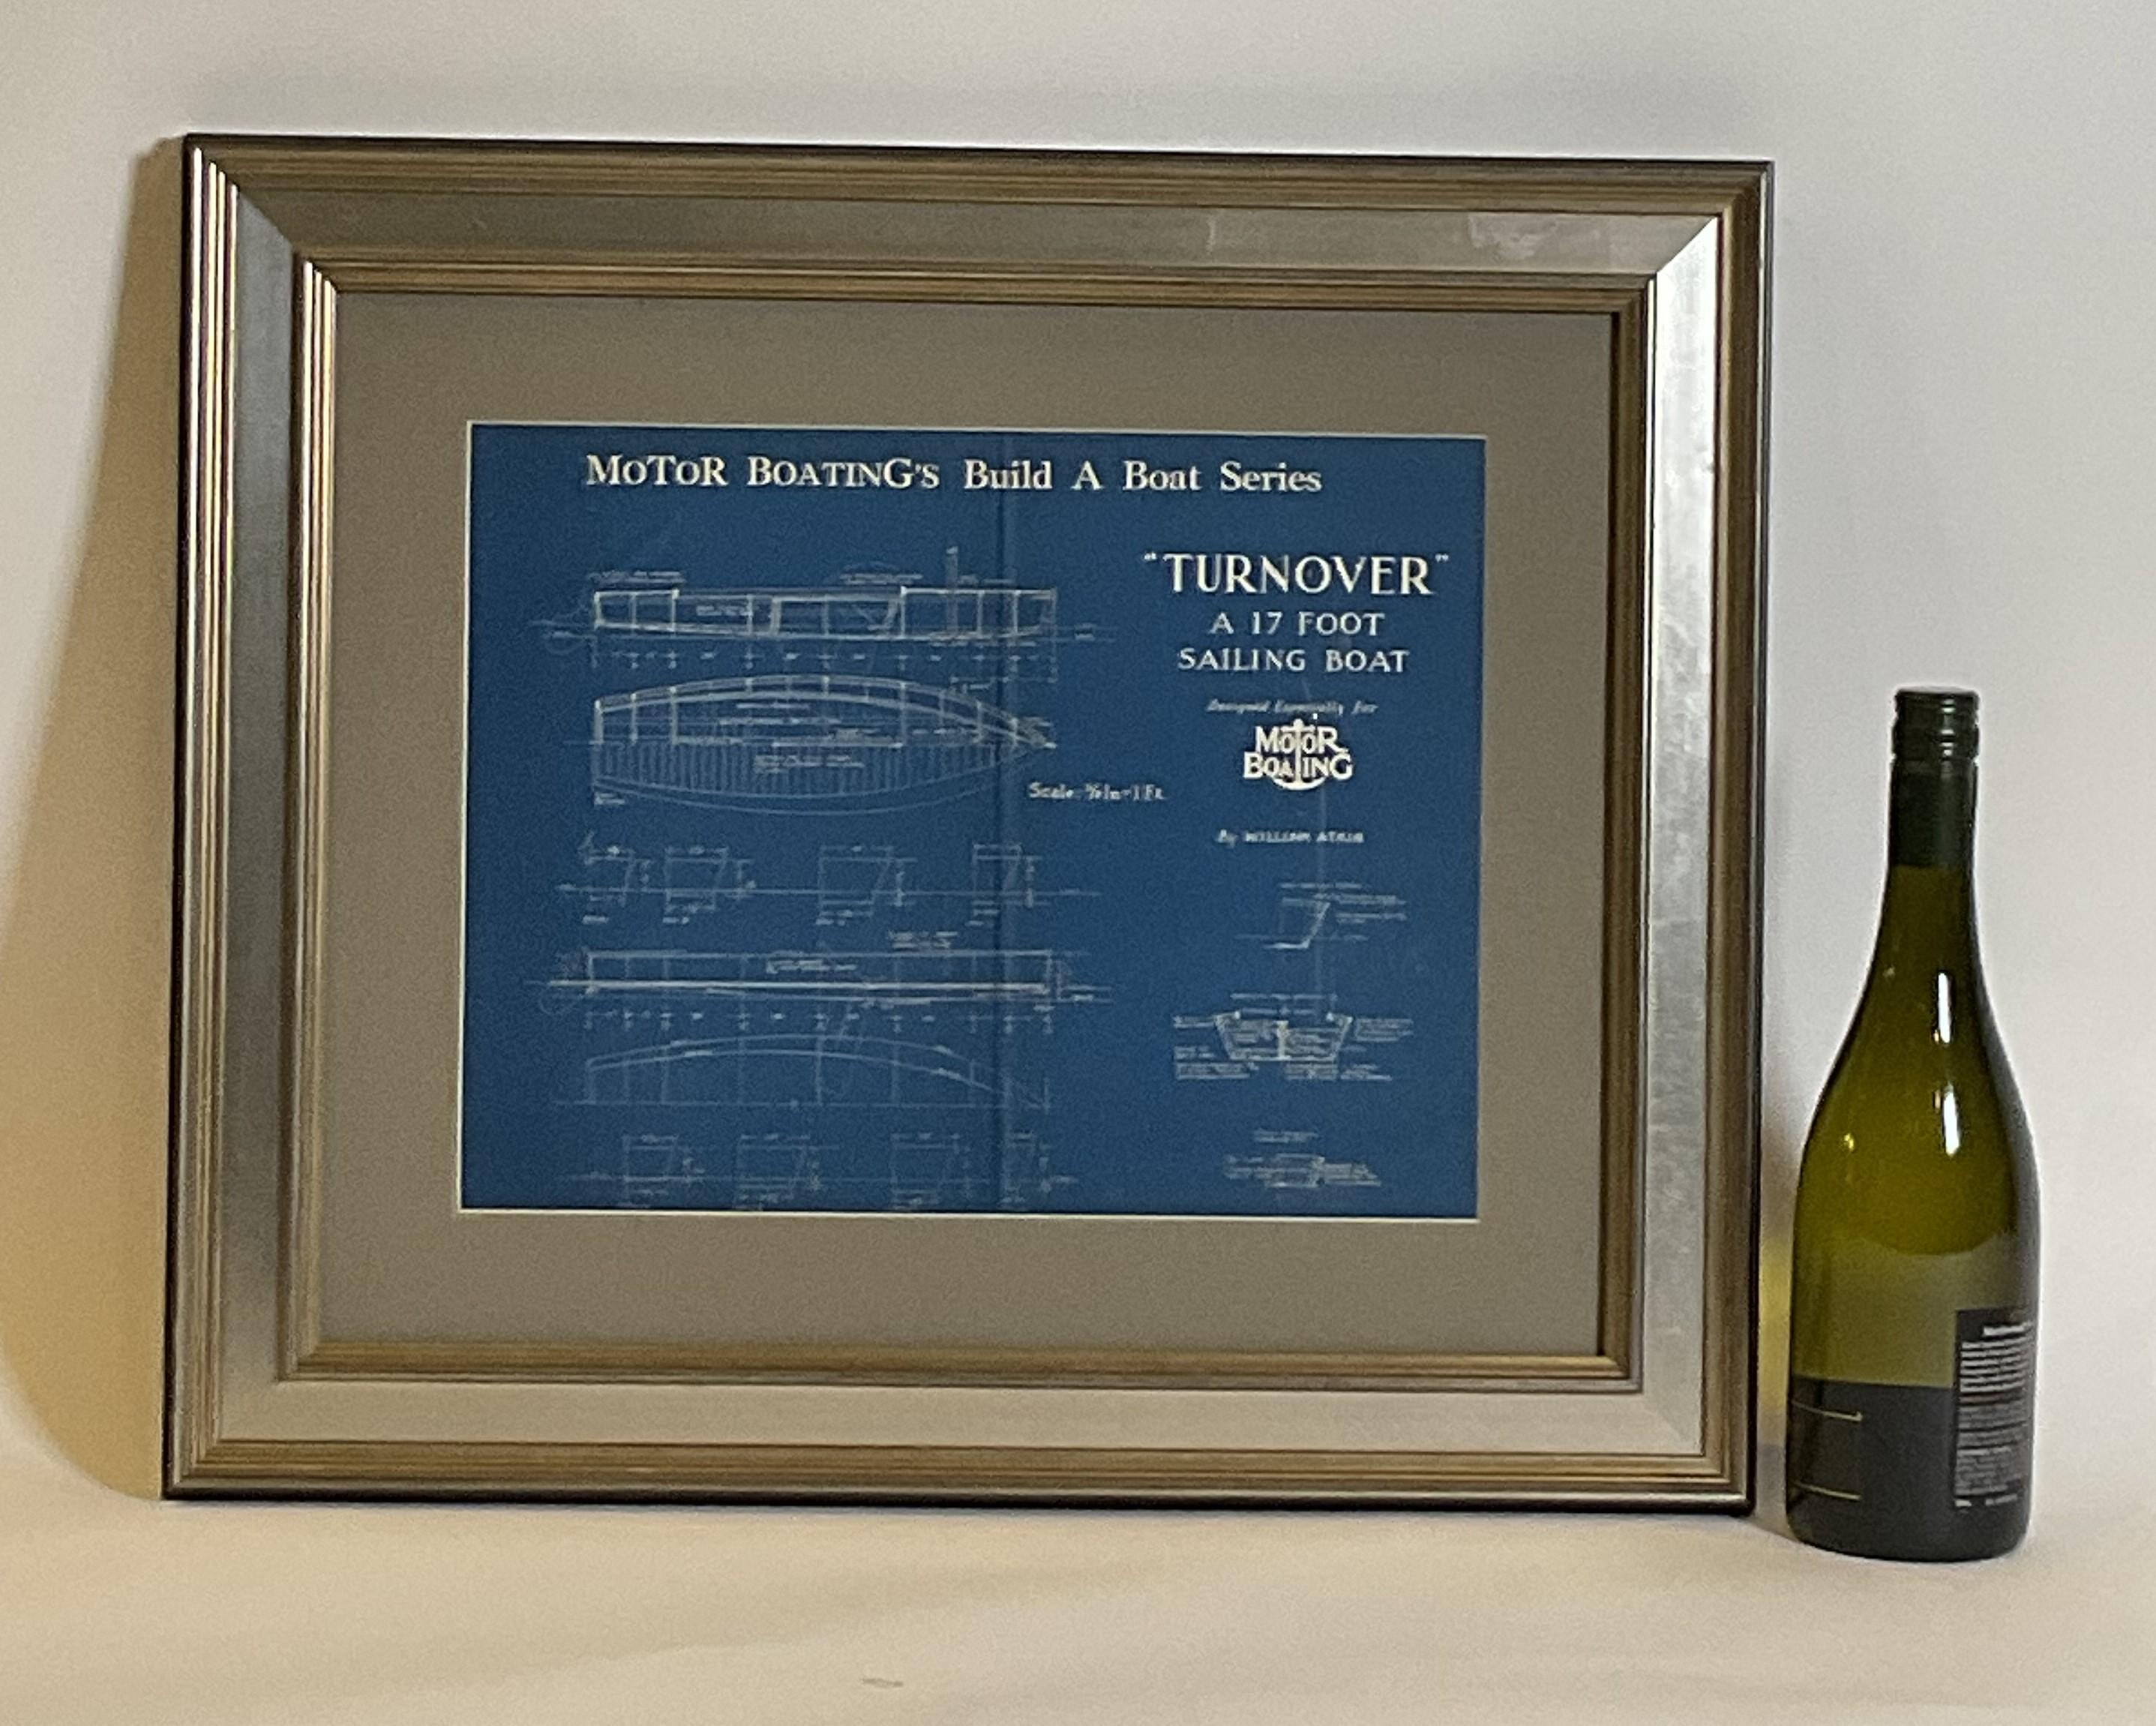 Framed blueprint of the sailboat turnover, designed by William Atkin for Motor Boating Publishing. Showing hull lines, deck, and profile. Circa 1937.

Weight: 6 lbs.
Overall Dimensions: 19